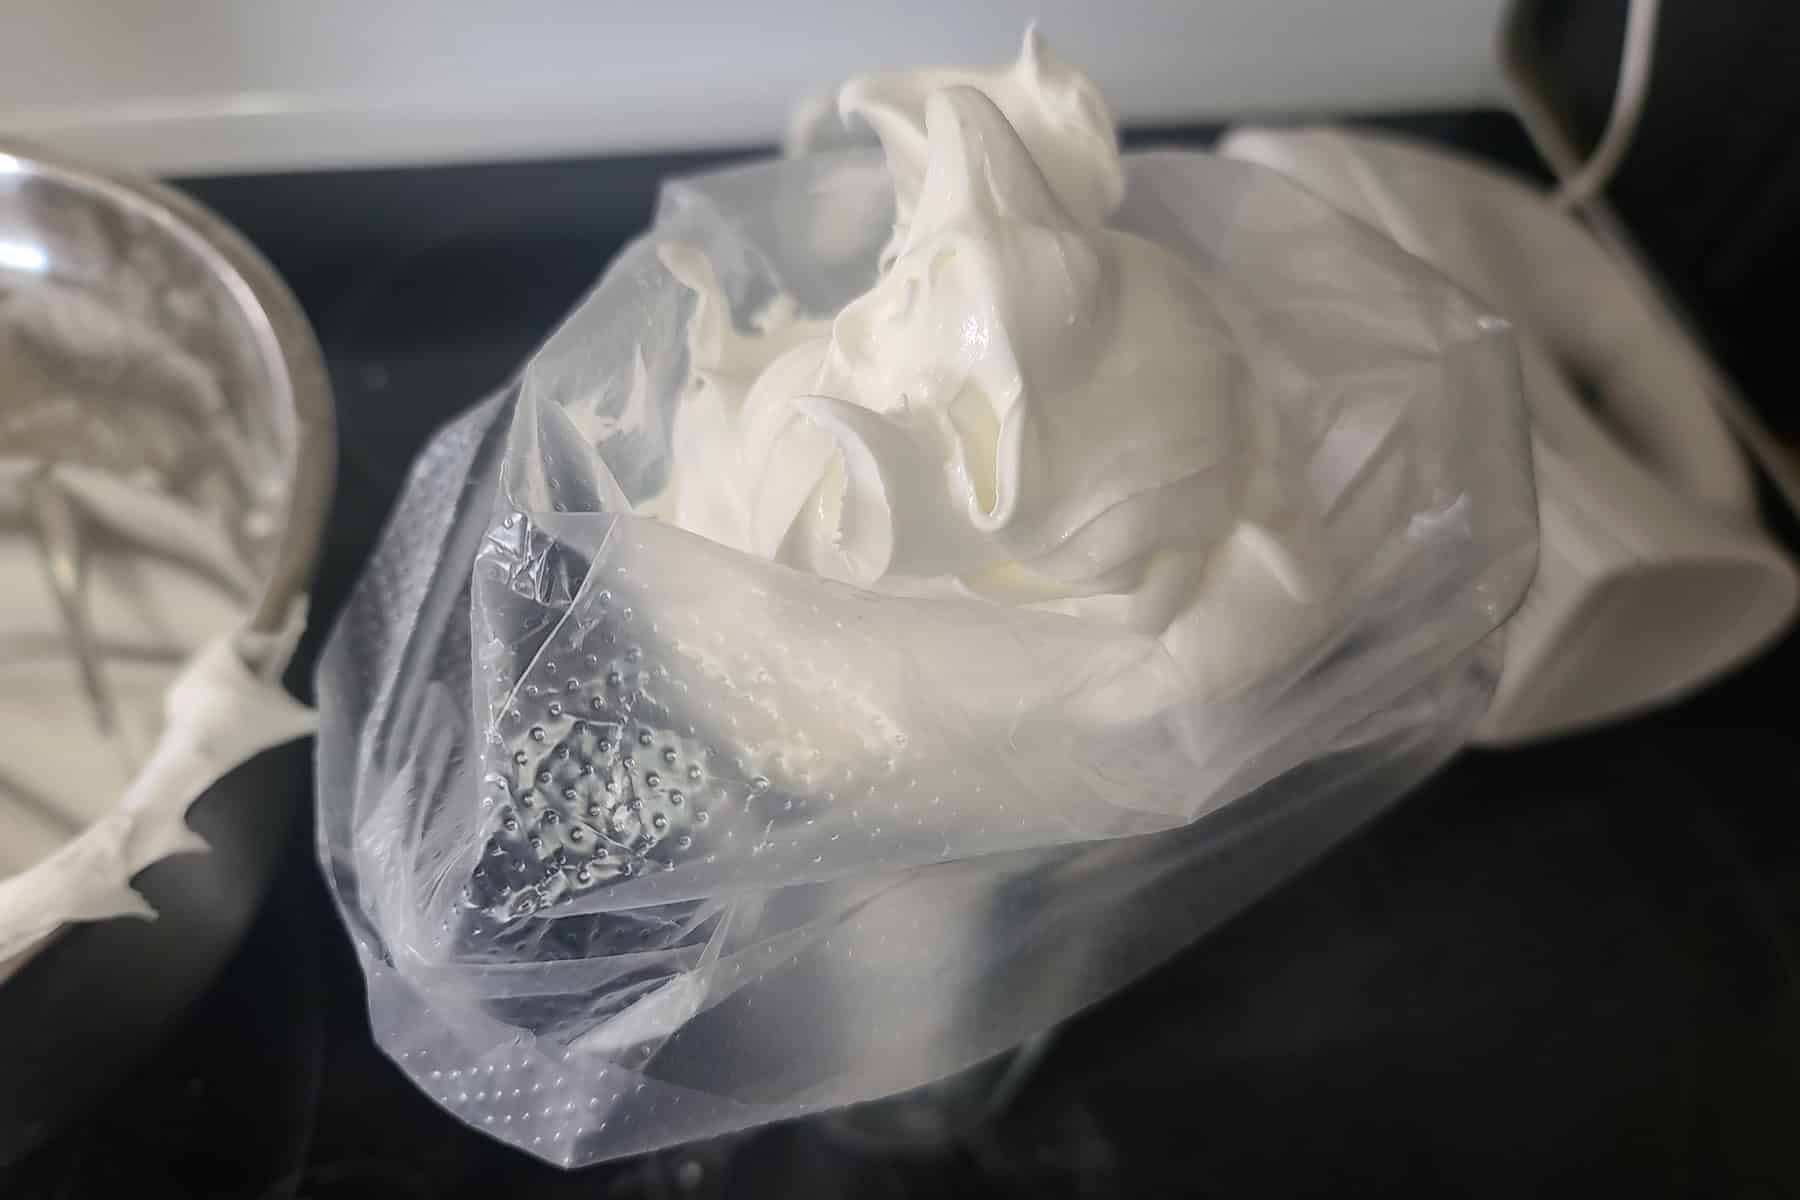 White royal icing being spooned into a pastry bag.